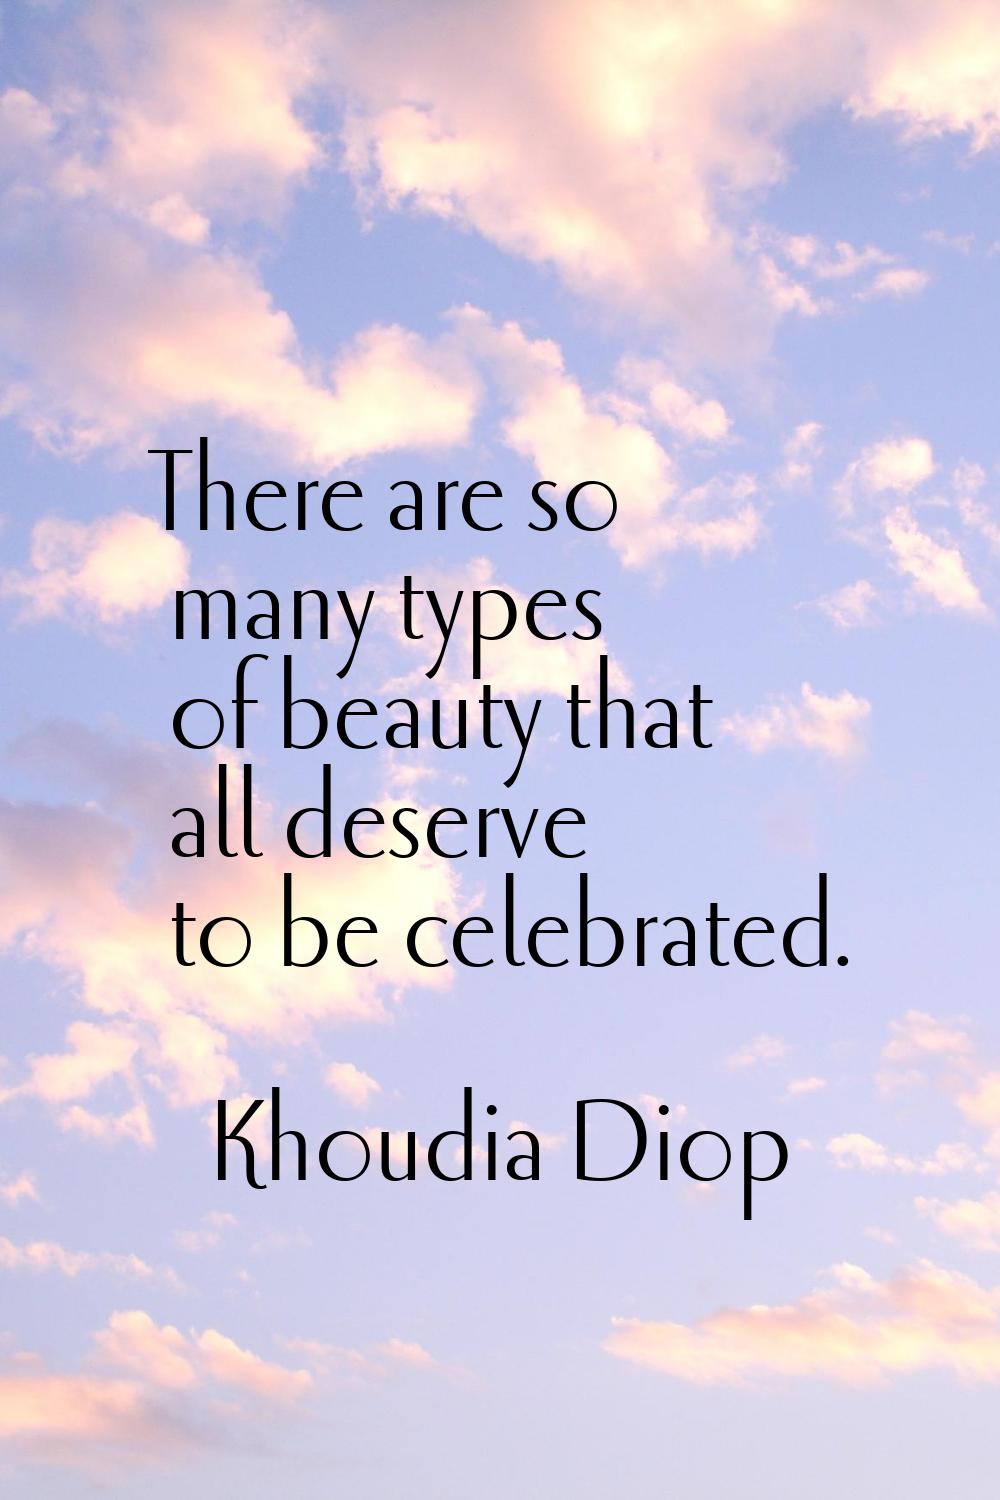 There are so many types of beauty that all deserve to be celebrated.